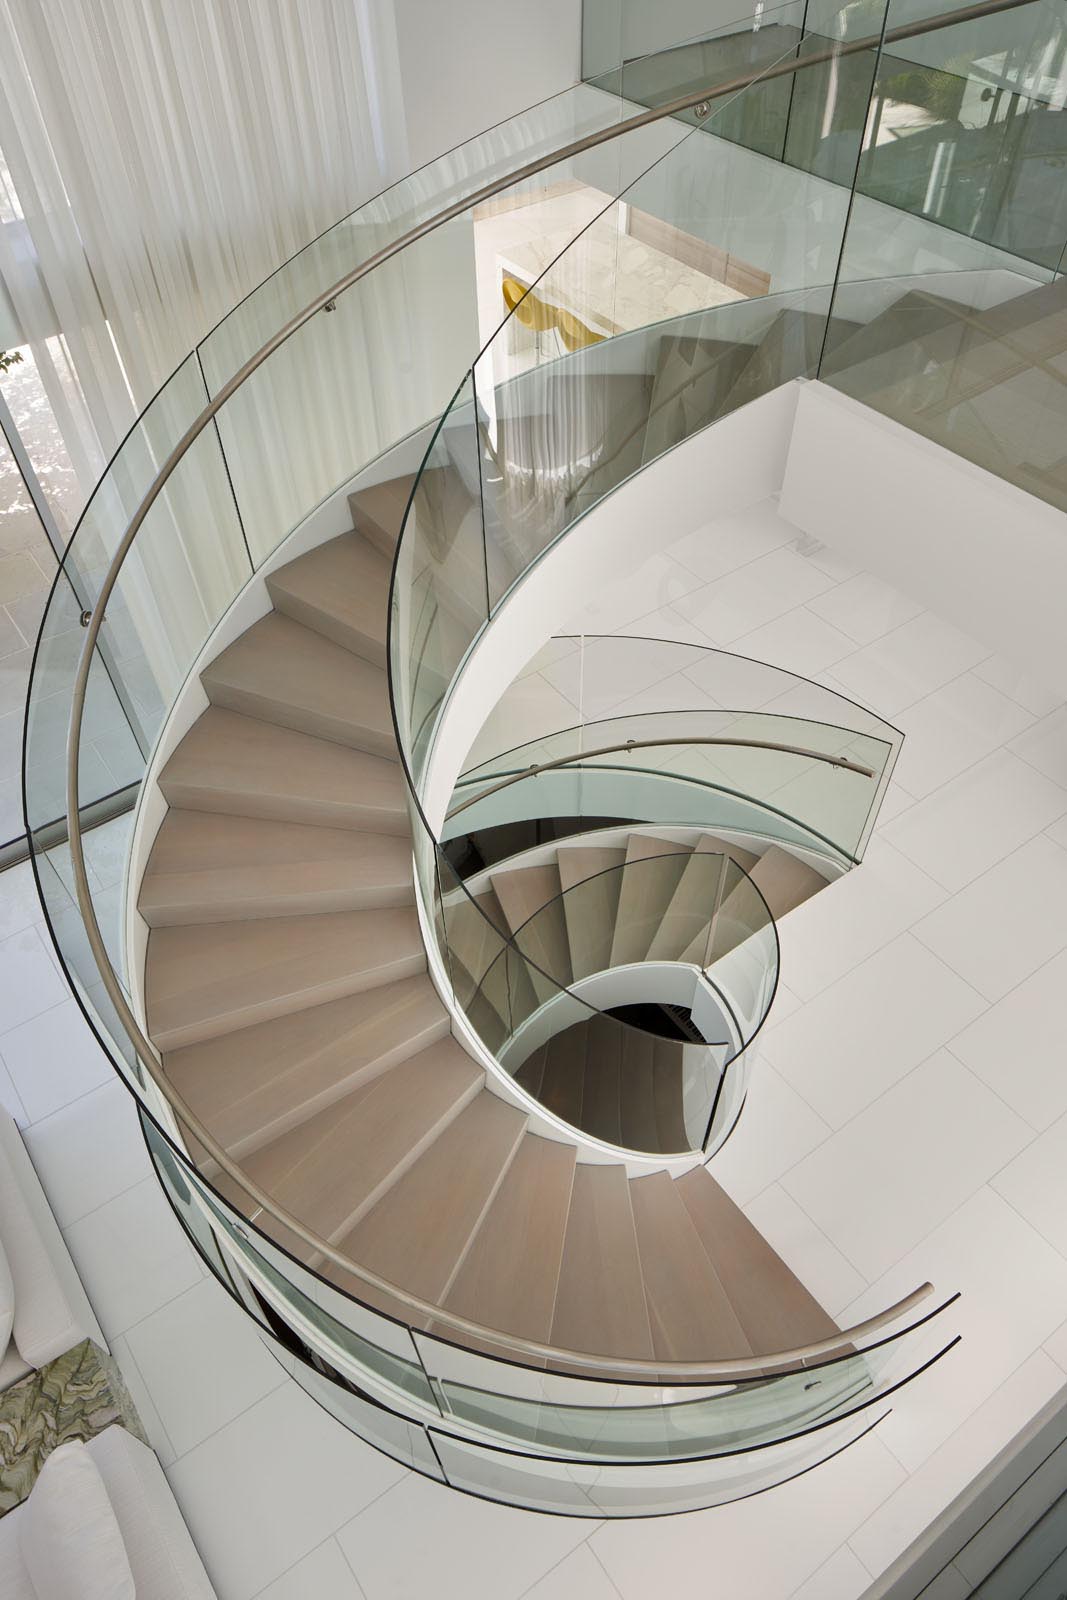 This custom designed spiral staircase includes glass handrails and a steel frame that complements the surrounding white walls.